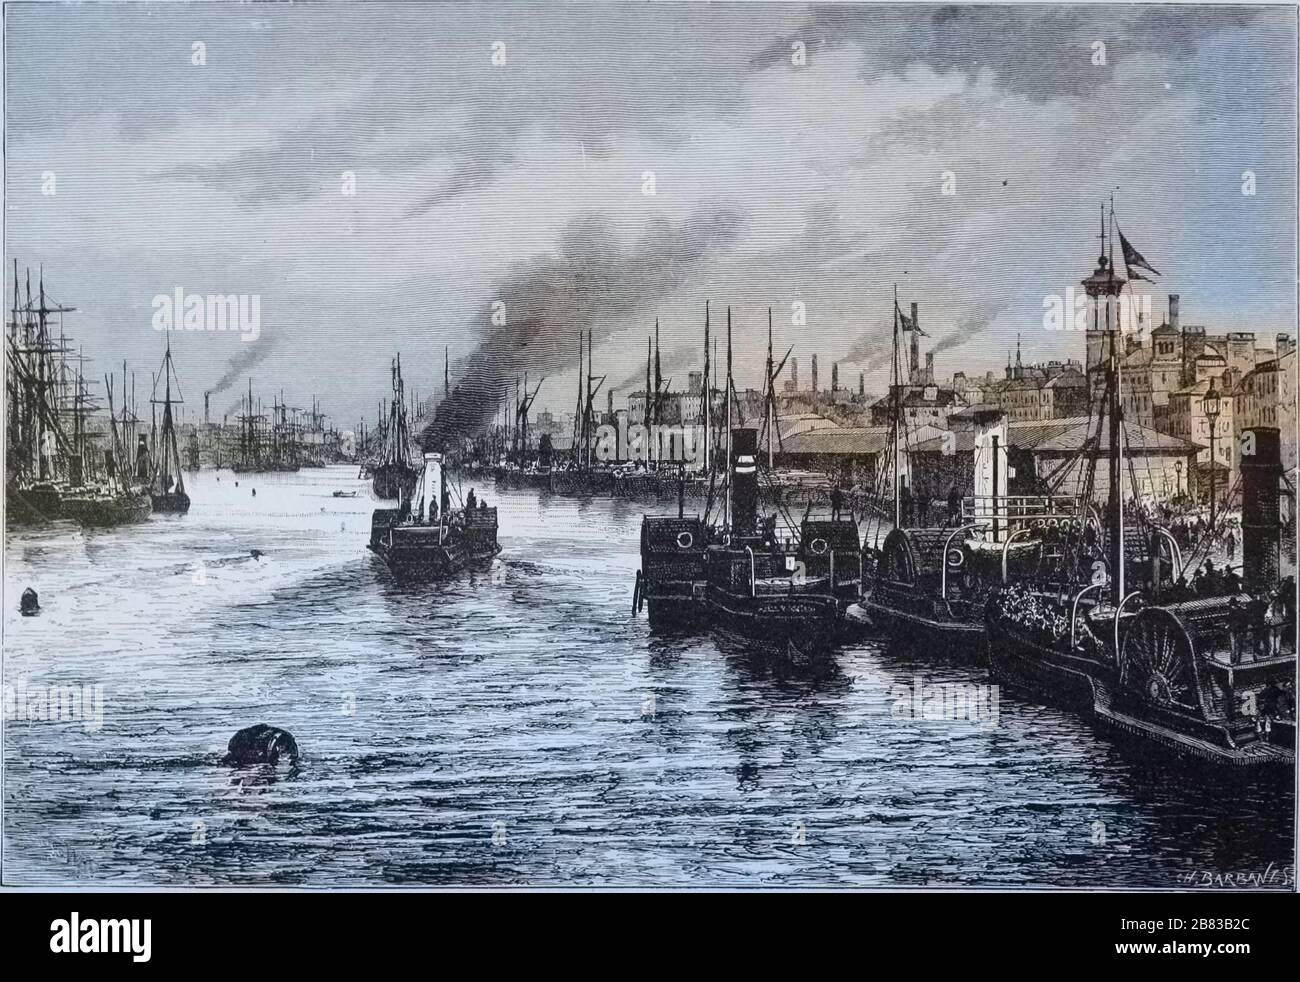 Engraving of the Port of Glasgow, Scotland, from the book 'The earth and its inhabitants' by Elisee Reclus, 1881. Courtesy Internet Archive. Note: Image has been digitally colorized using a modern process. Colors may not be period-accurate. () Stock Photo